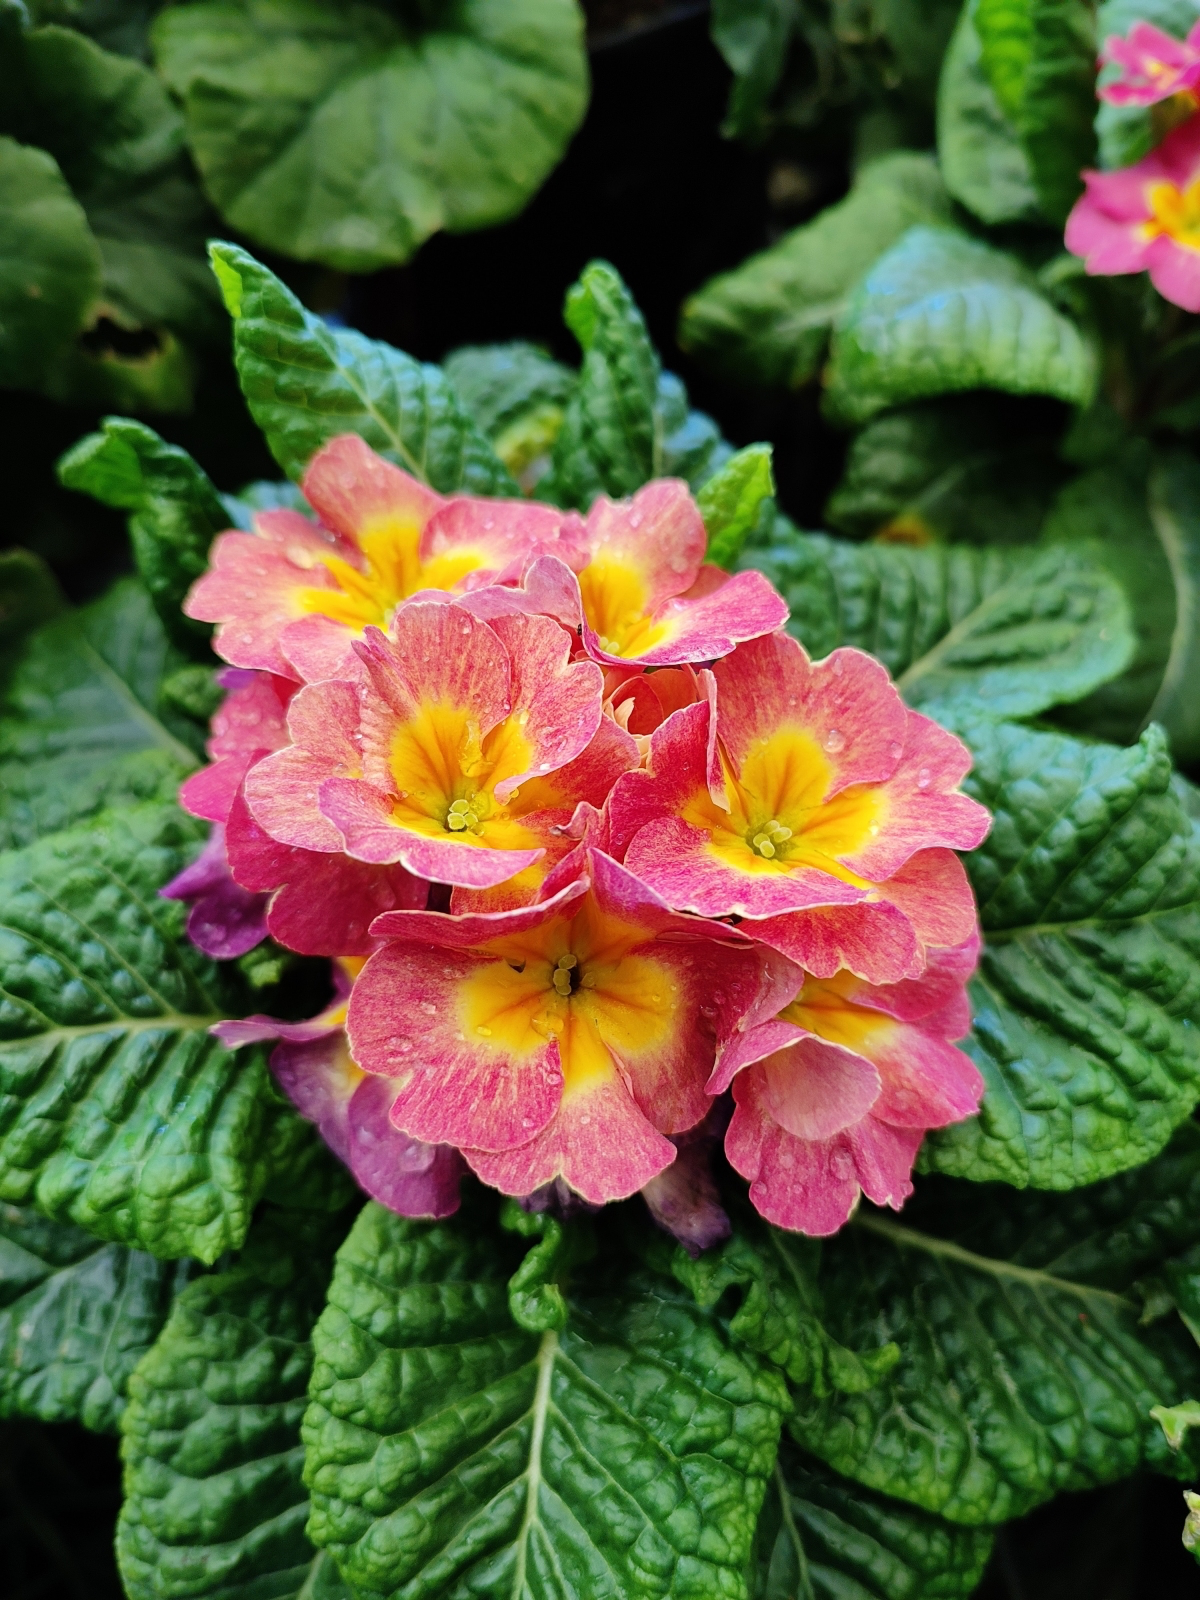 caring for primroses outdoors